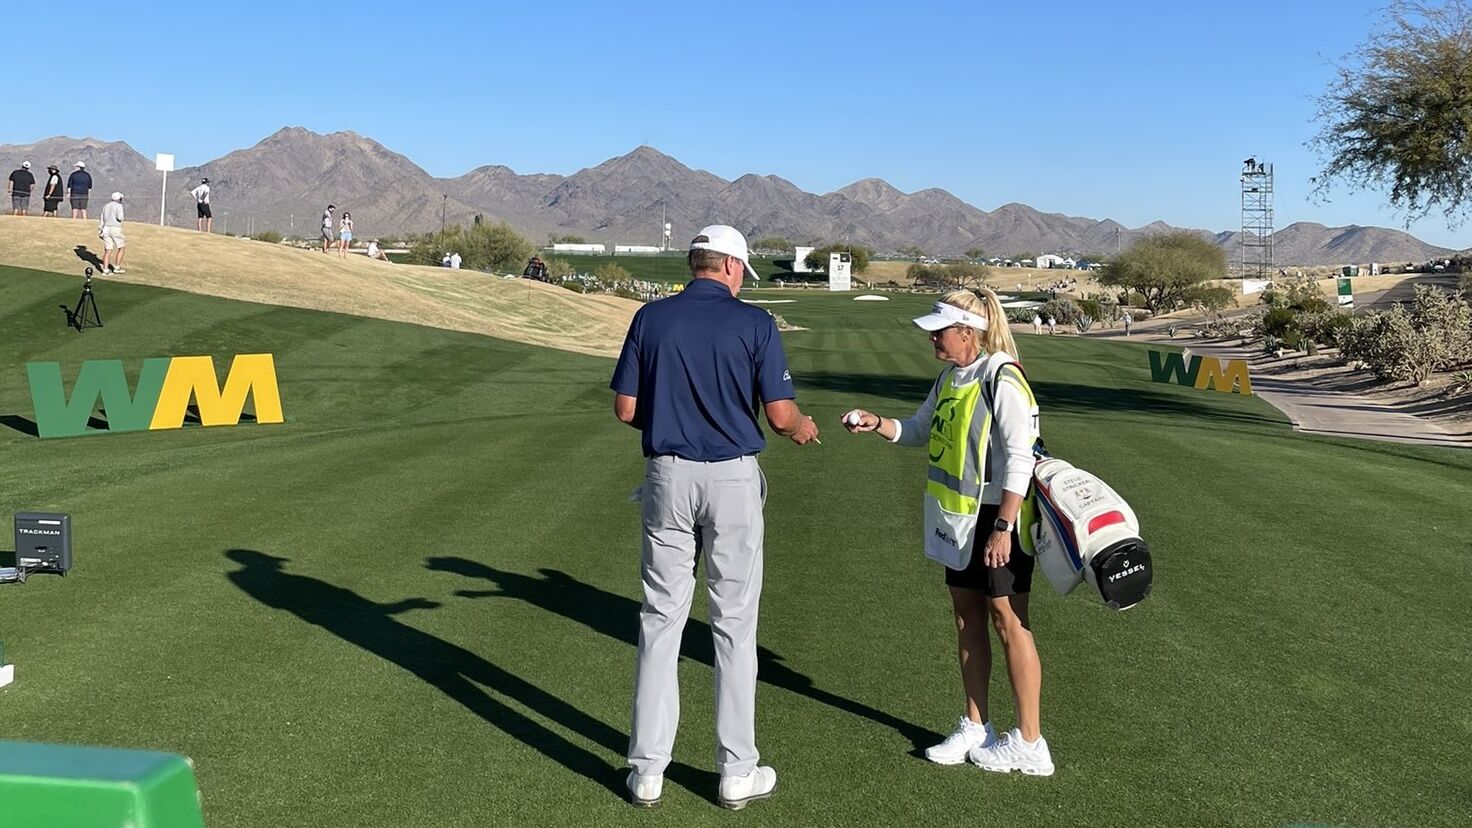 Spirited pairing with fellow Ryder Cup captain Padraig Harrington, fellow Madisonian Jerry Kelly puts Steve Stricker in the hunt in Phoenix Mens Professional wisconsin.golf